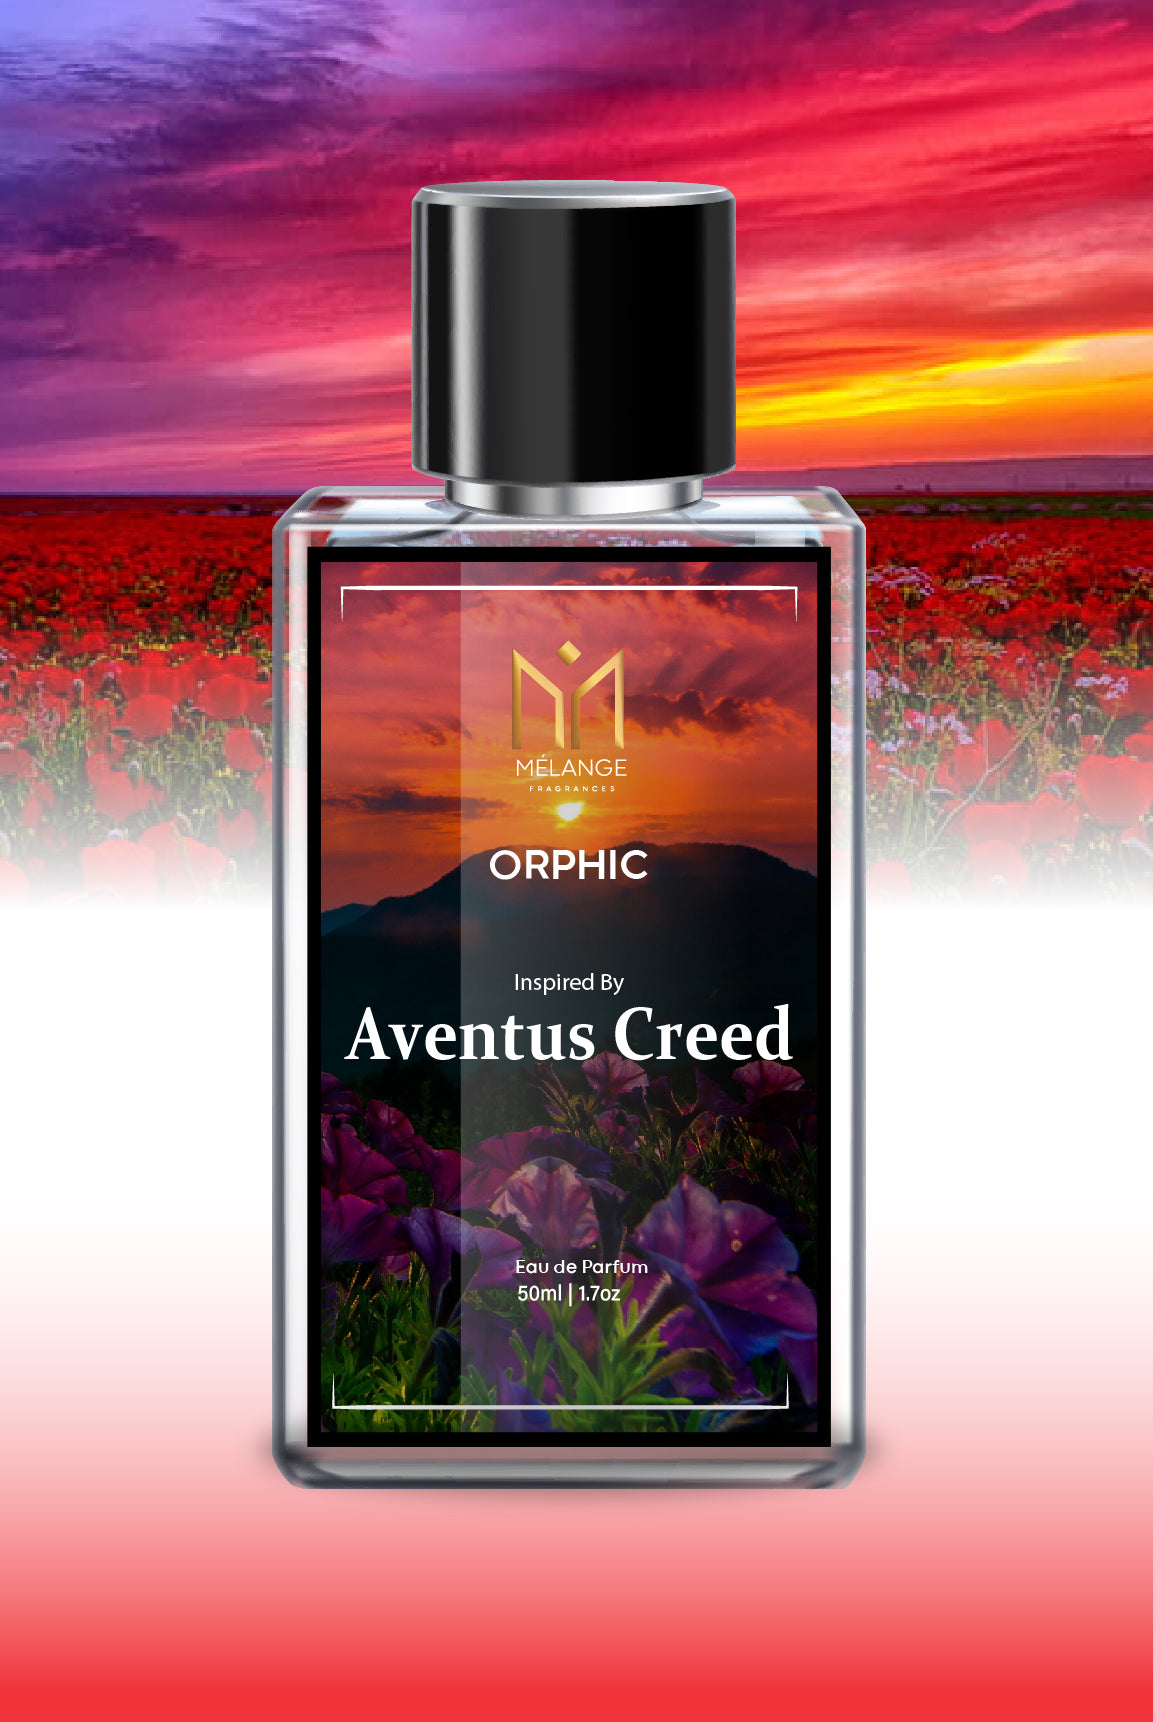 ORPHIC- Inspired by Aventus Creed